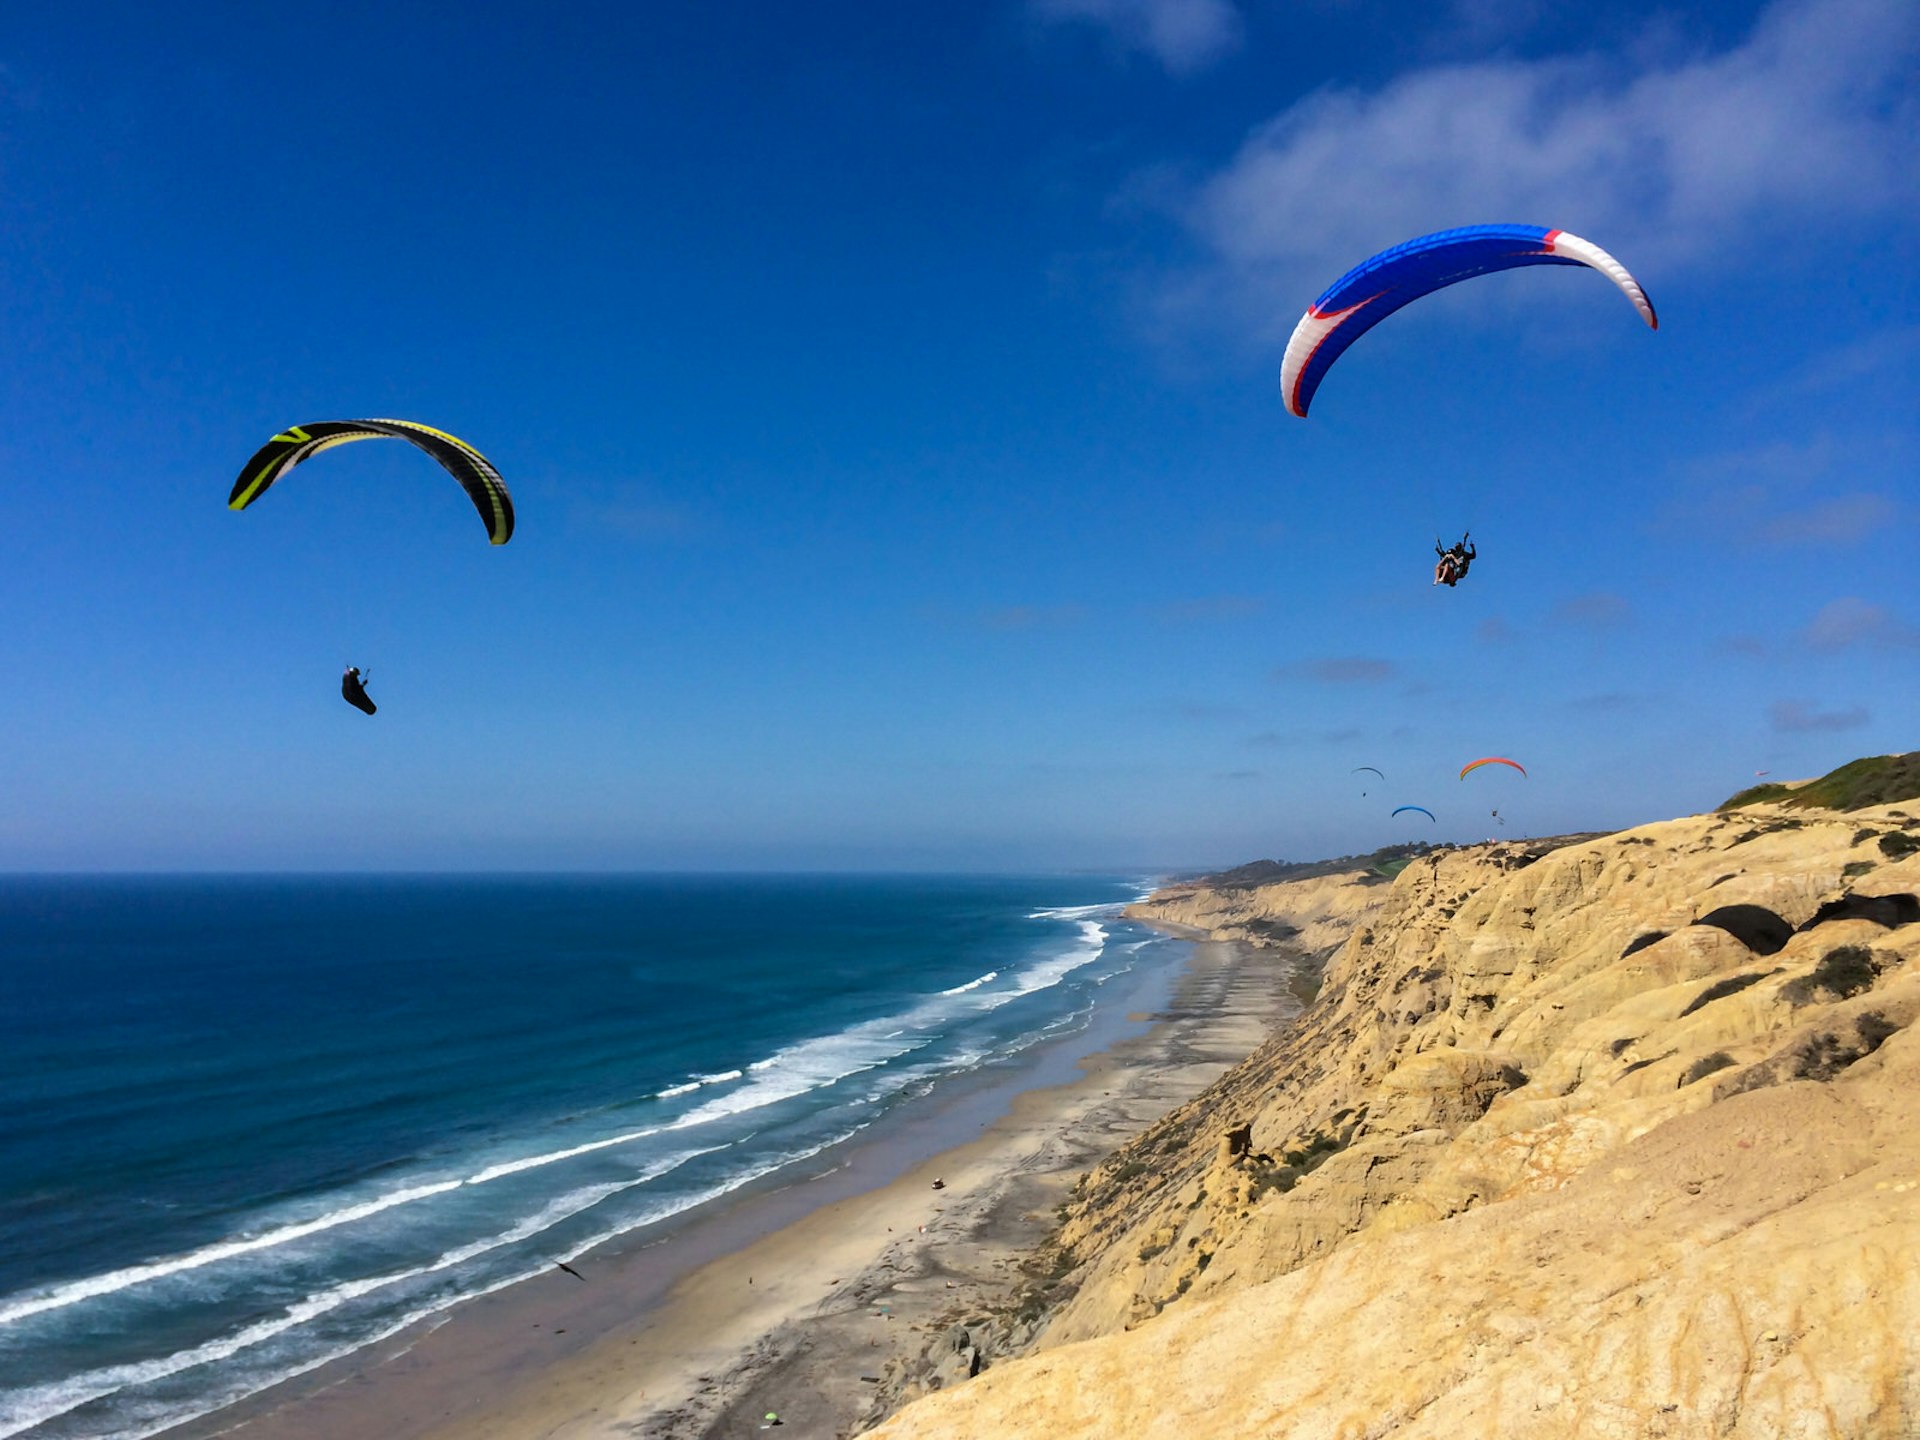 Five paragliders soar in the cobalt blue sky over the seemingly never-ending Black's Beach, part of which is a nude beach; the sands arc gently into the distance, while sets of waves roll in with white tops, and backing the beach are yellowish bulbous cliffs dotted with foliage